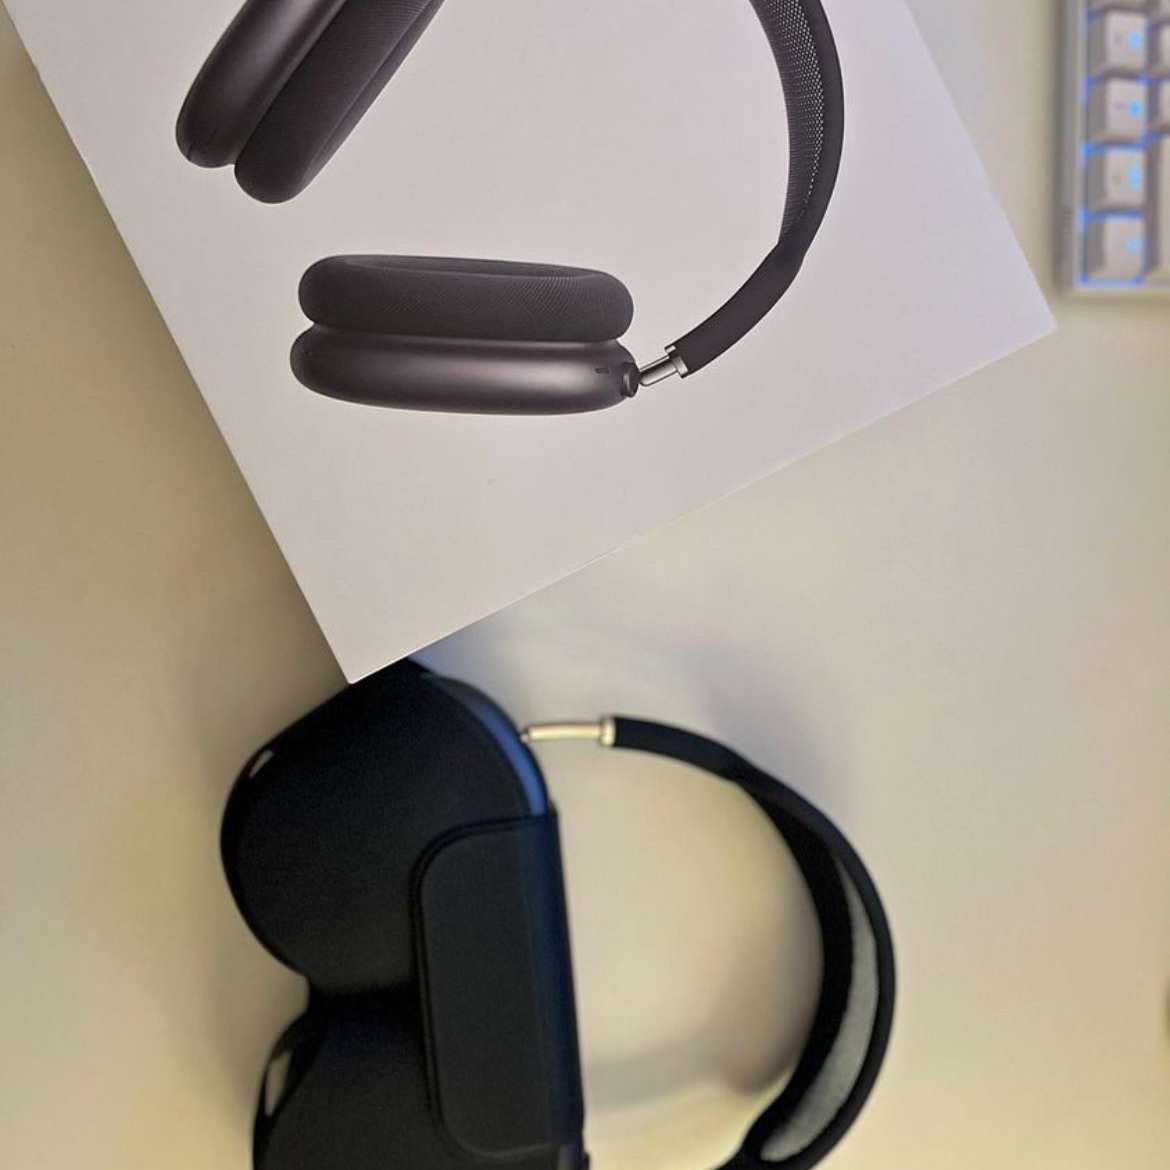 Apple Airpod Max Brand New (price is negotiable)